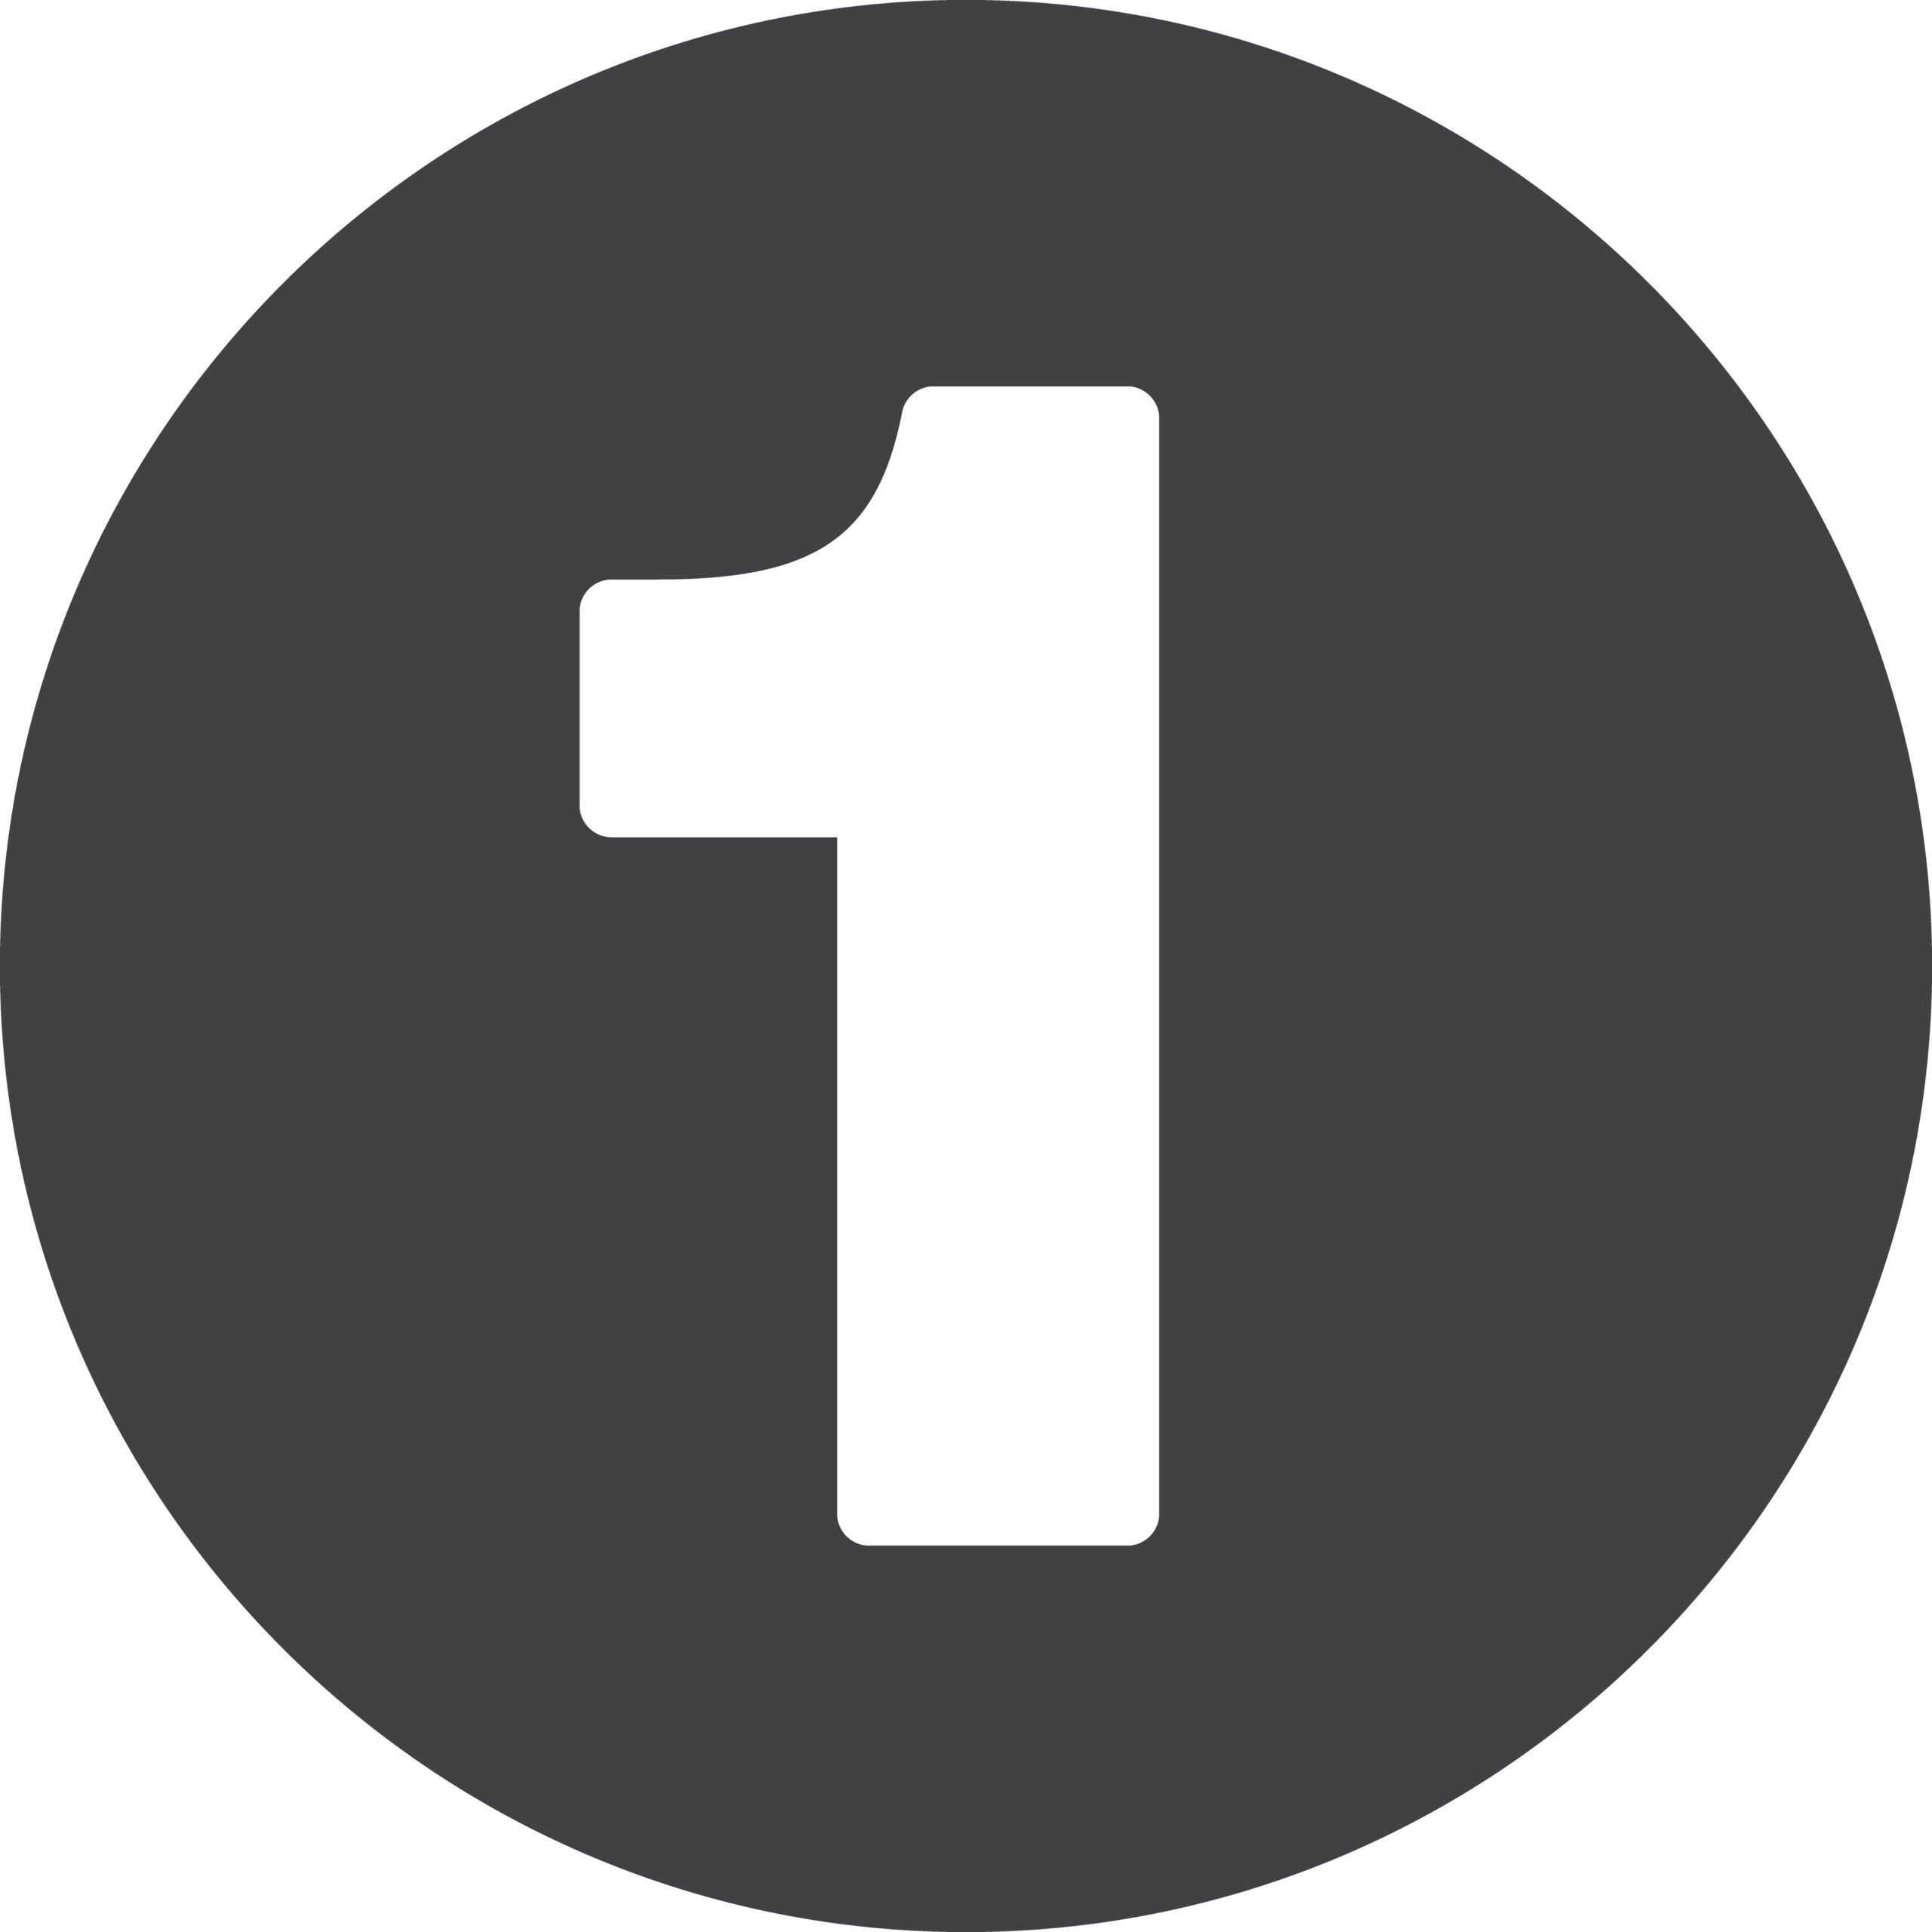 Number 1 flat icon, circular sign, round button one